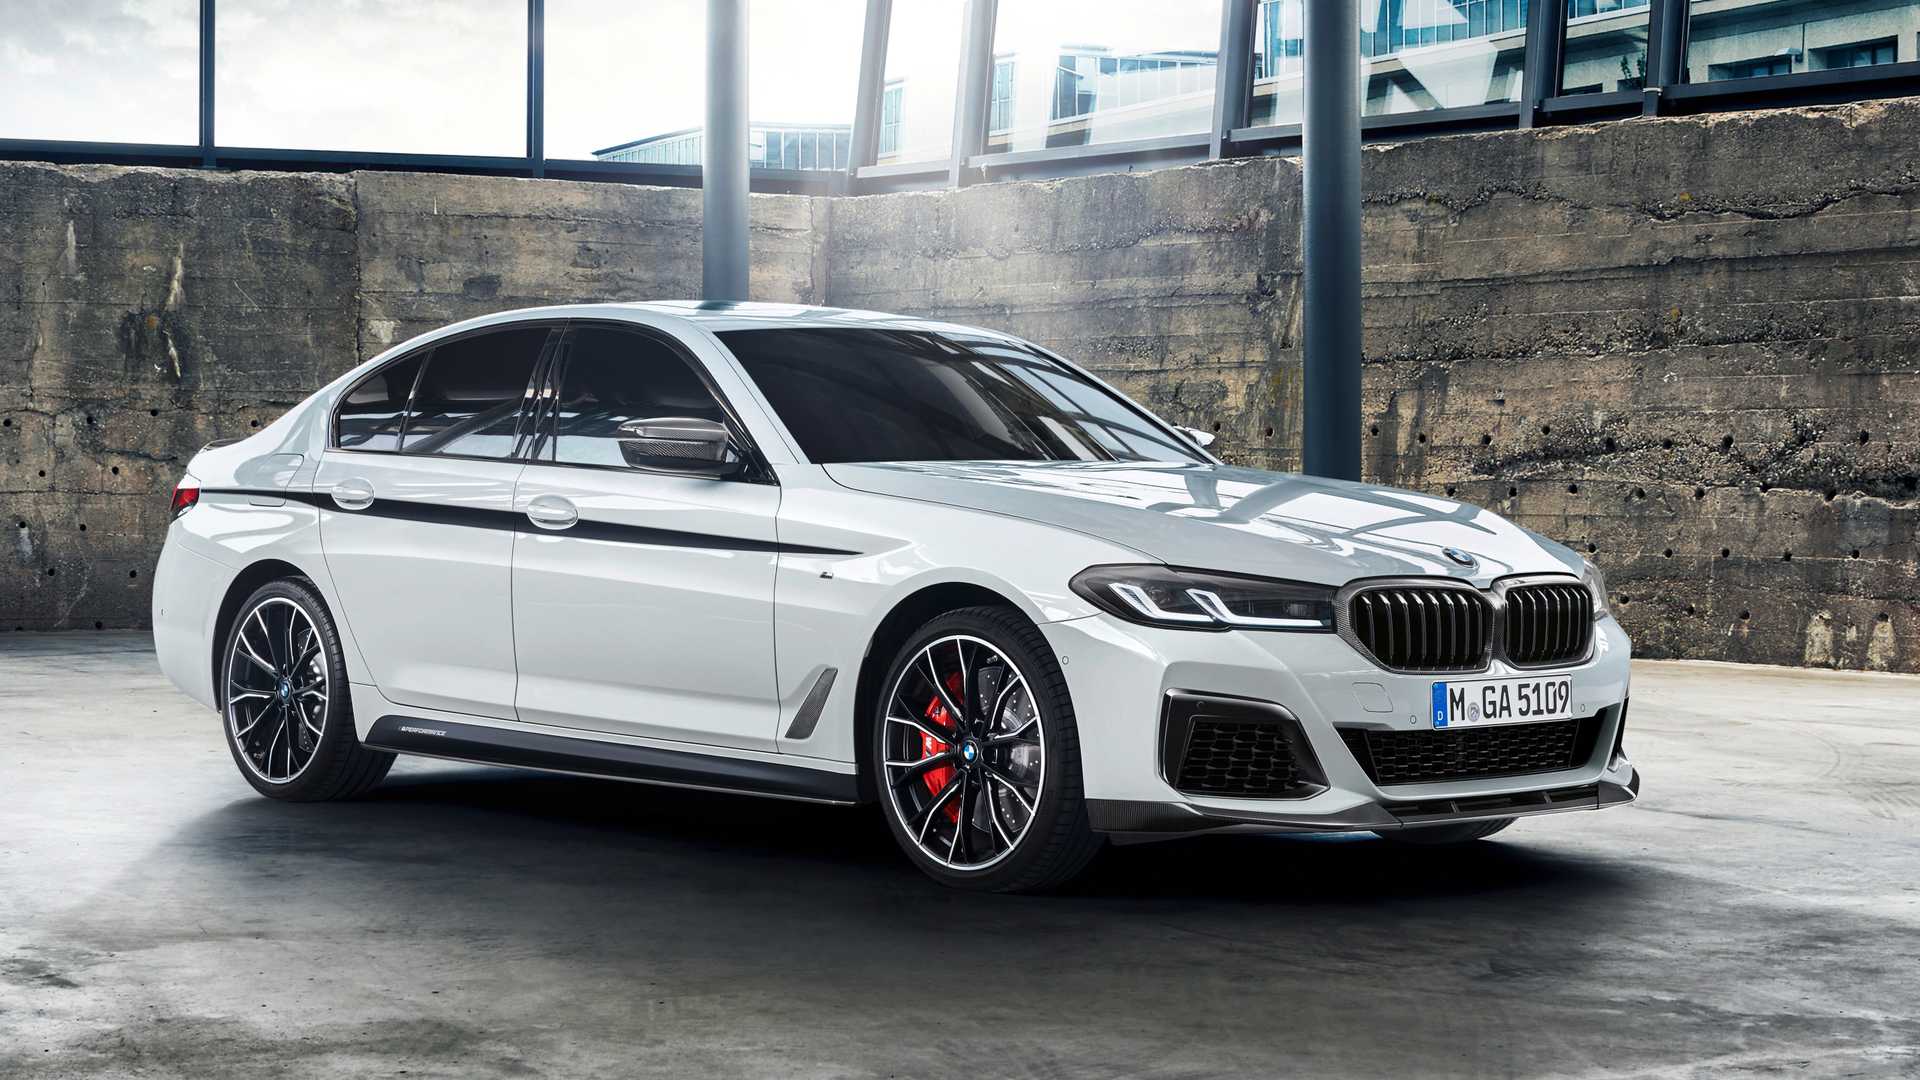 BMW 5 Series, M5 and M5 Competition Look Delicious With M